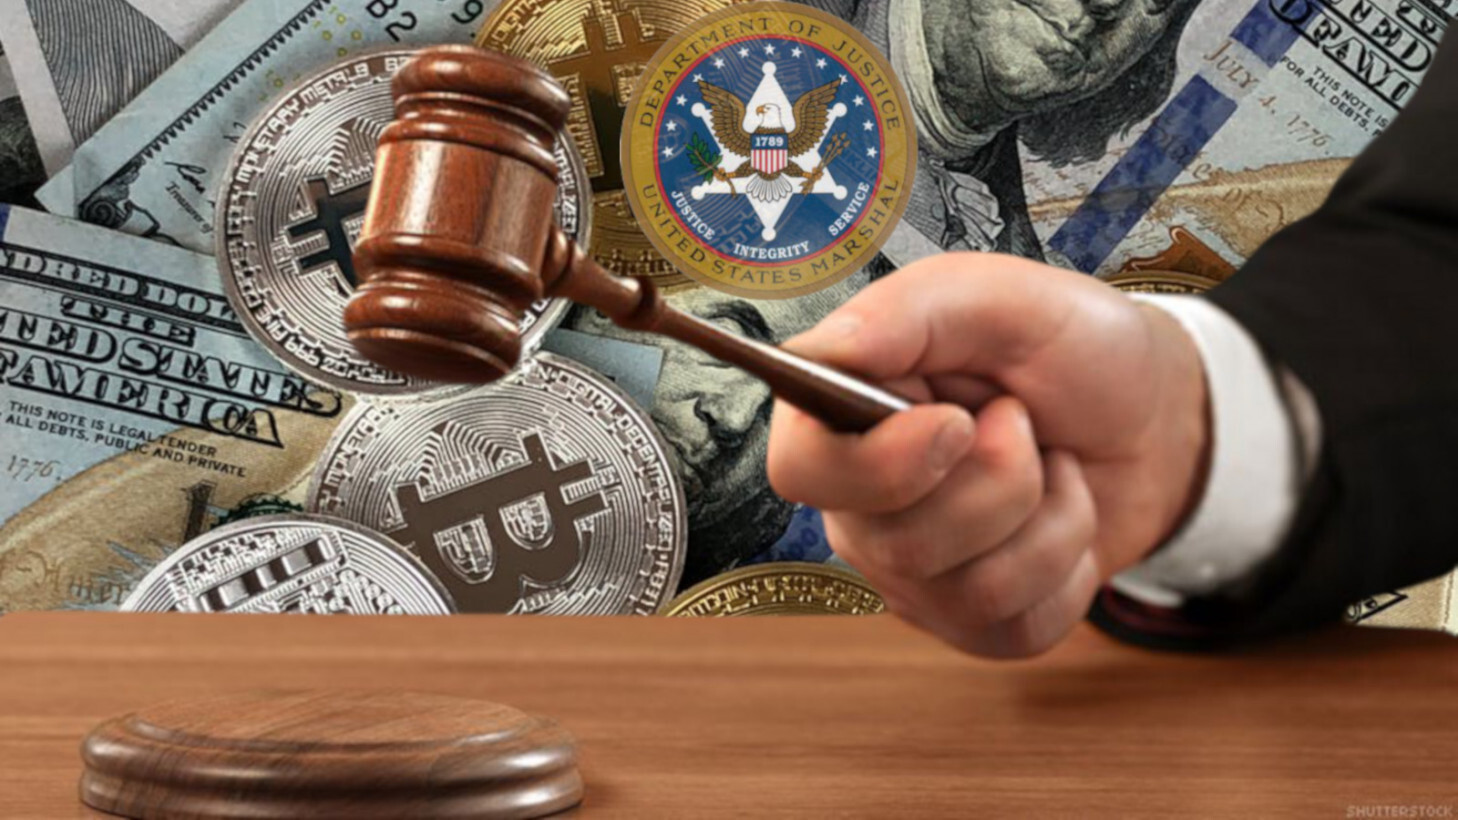 The US government lost $1.7 billion by selling Bitcoin too early